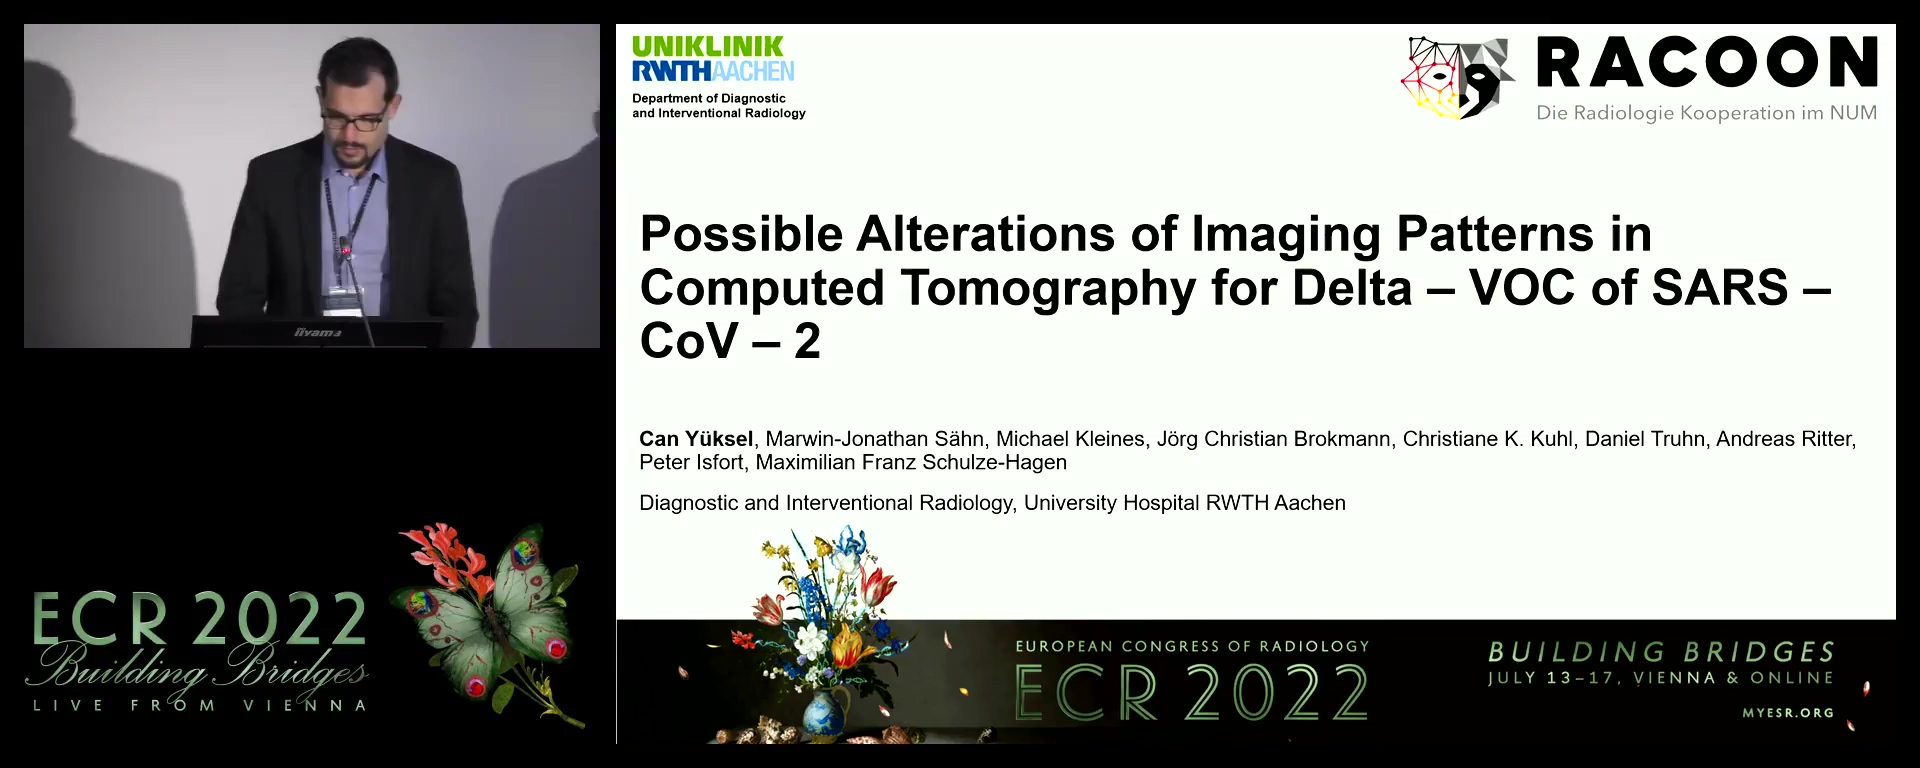 Possible alterations of imaging patterns in computed tomography for Delta-VOC of SARS-CoV-2 - Can Yueksel, Aachen / DE